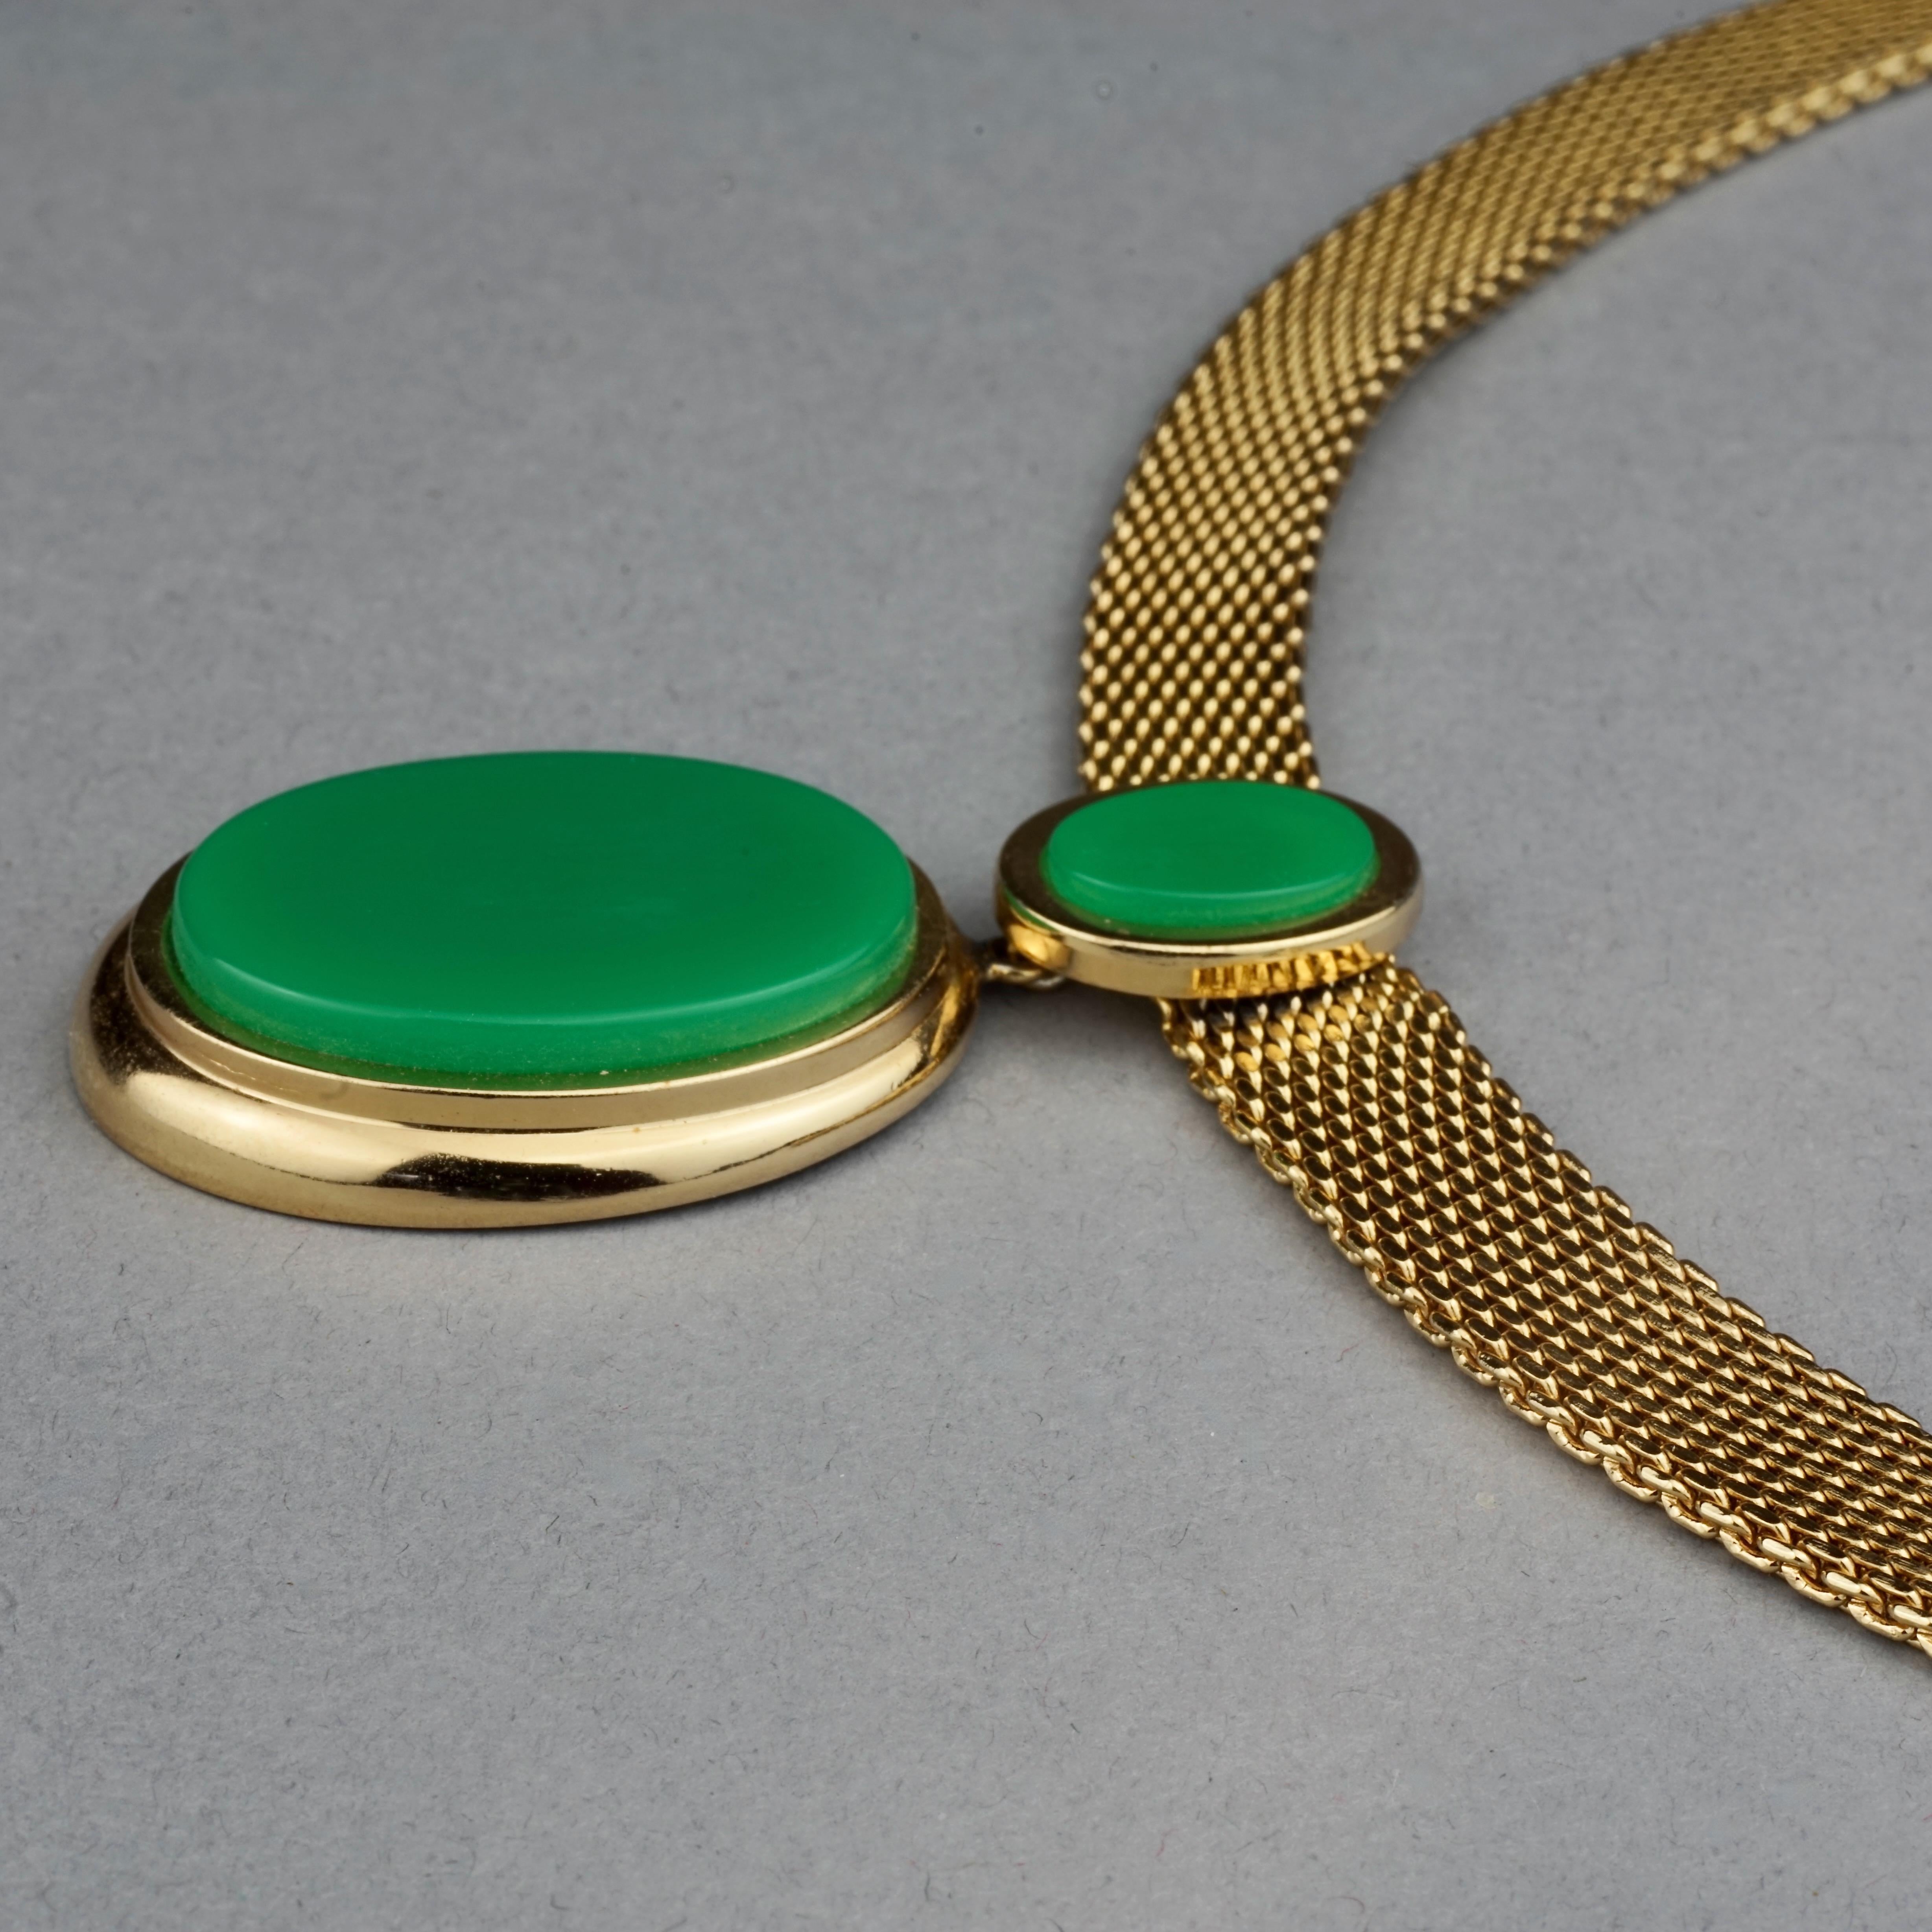 Vintage 1971 CHRISTIAN DIOR Double Oval Green Pendant Chain Necklace For Sale 3